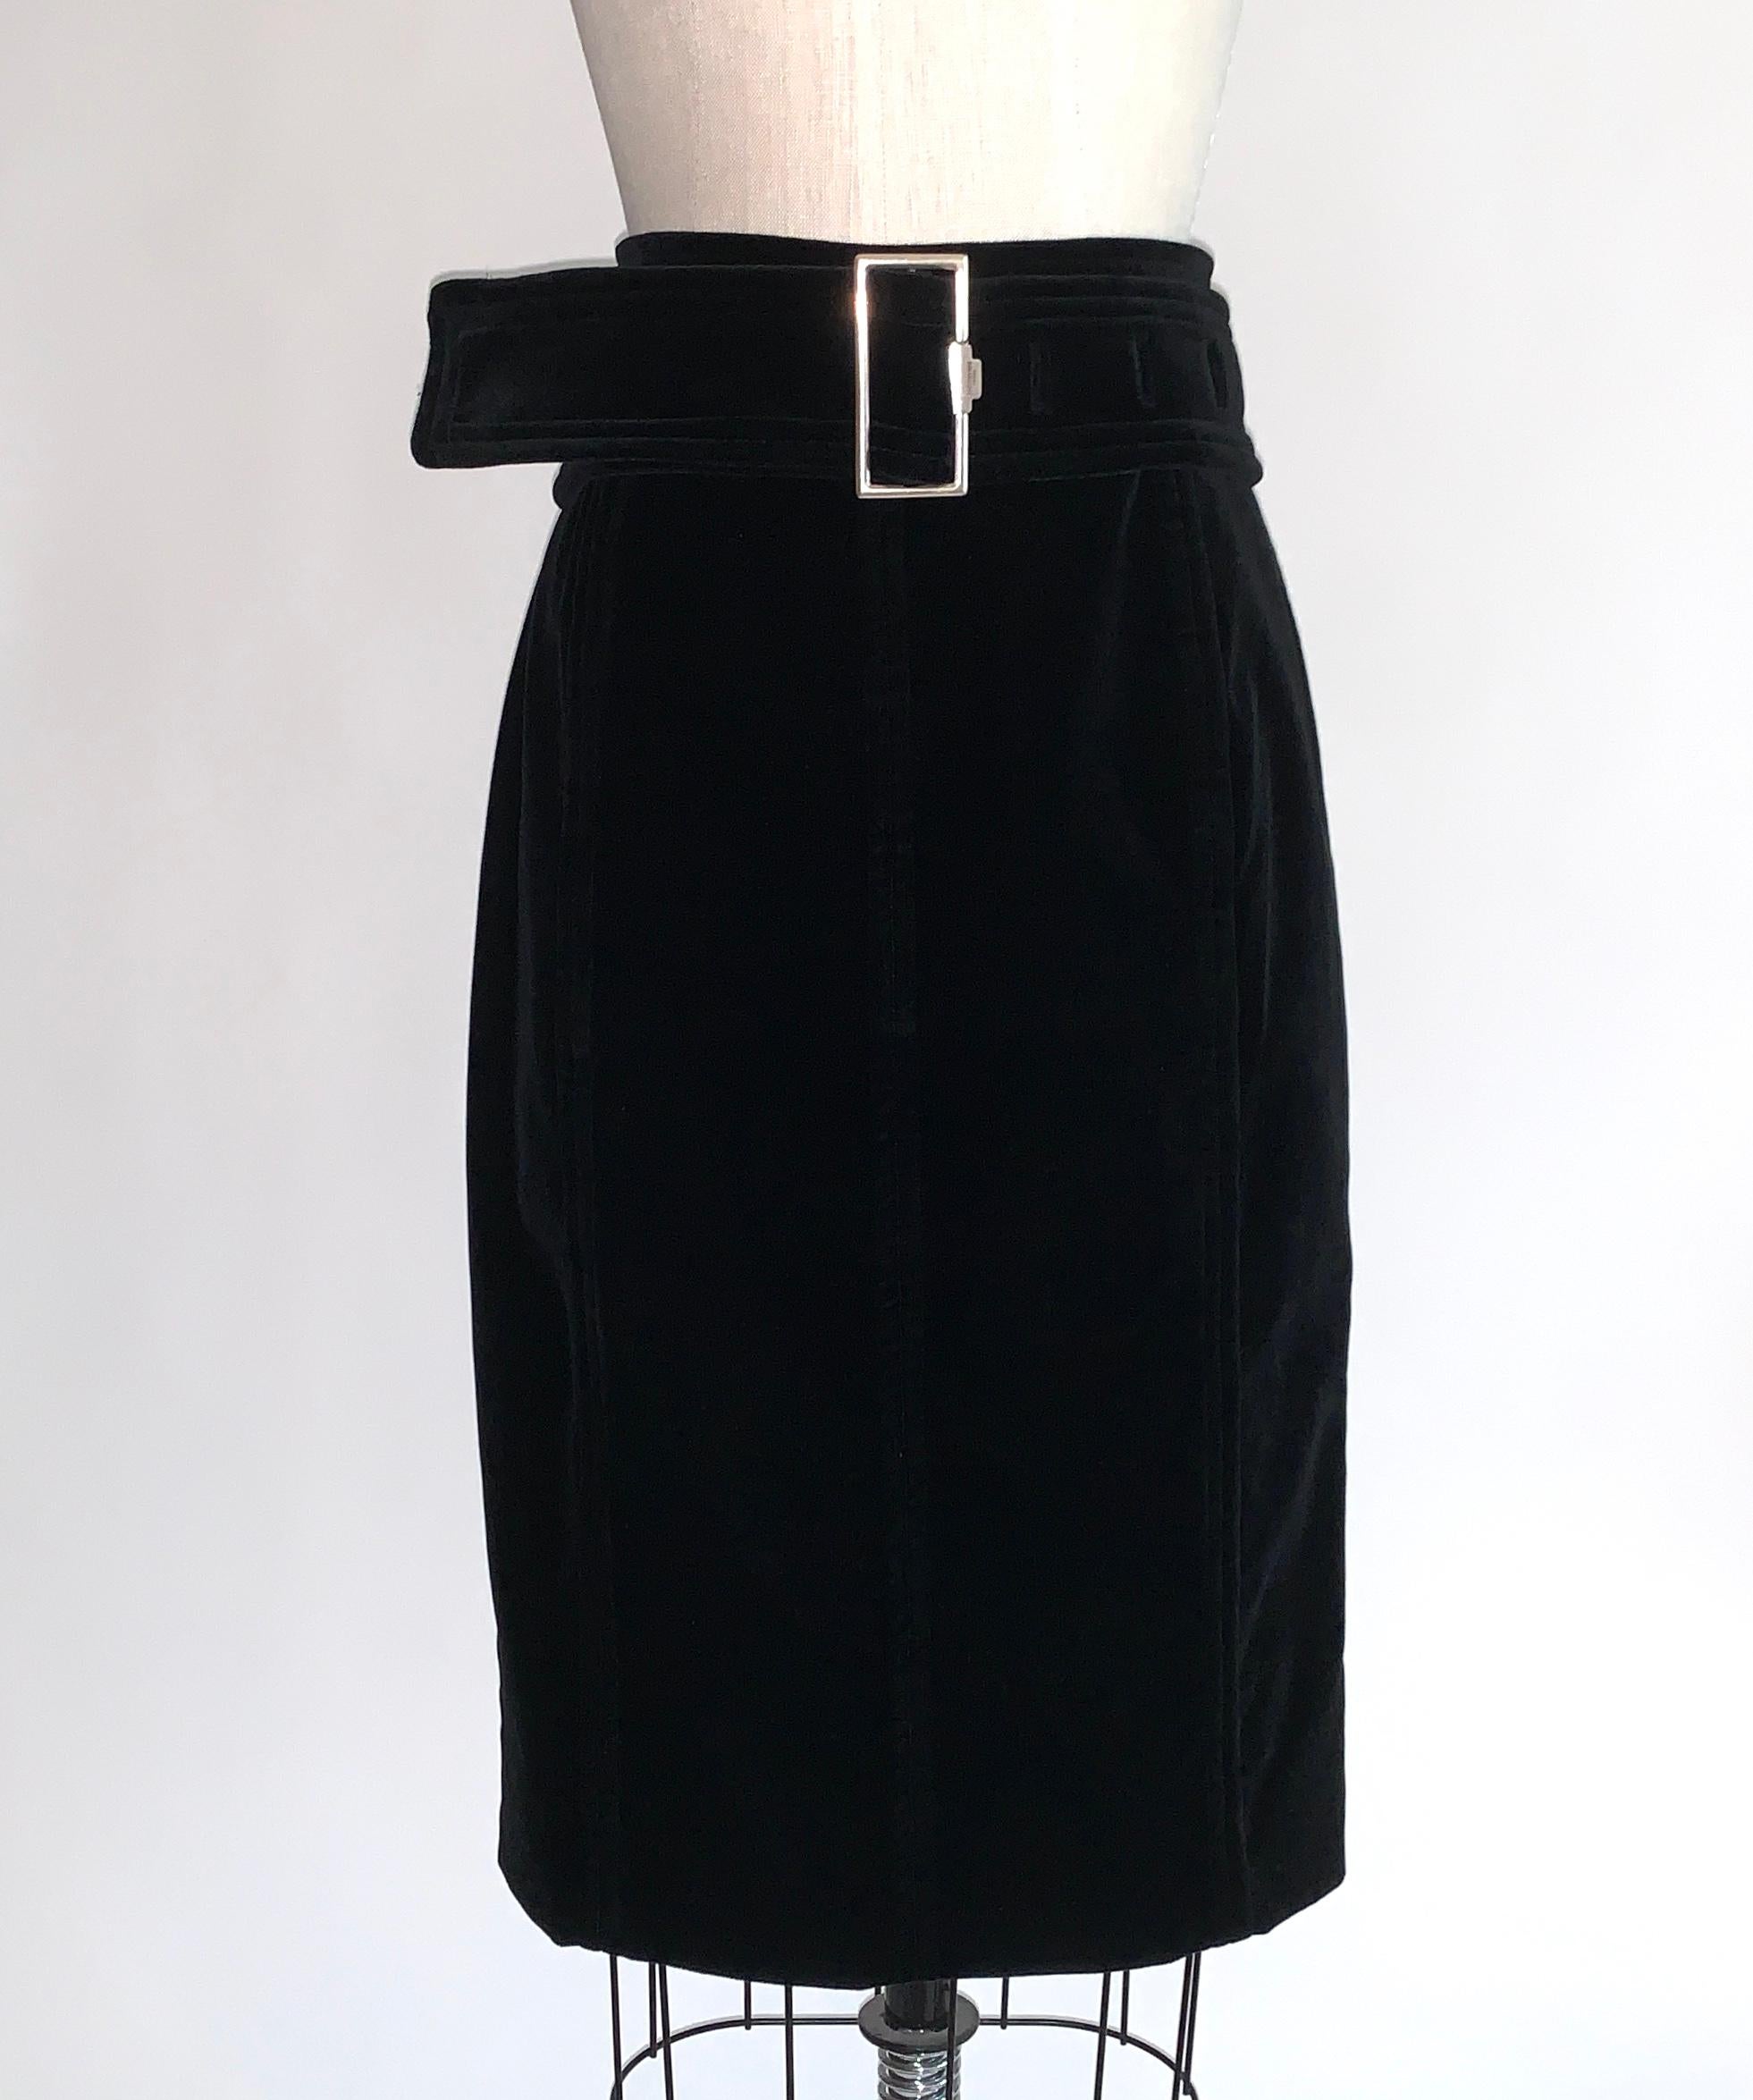 Yves Saint Laurent black velvet Rive Gauche pencil skirt with wide black velvet belt with silver buckle front. Signed Yves Saint Laurent Paris at front buckle, YSL on back zip. No belt loops, so skirt can be worn with or without belt. Back zip and